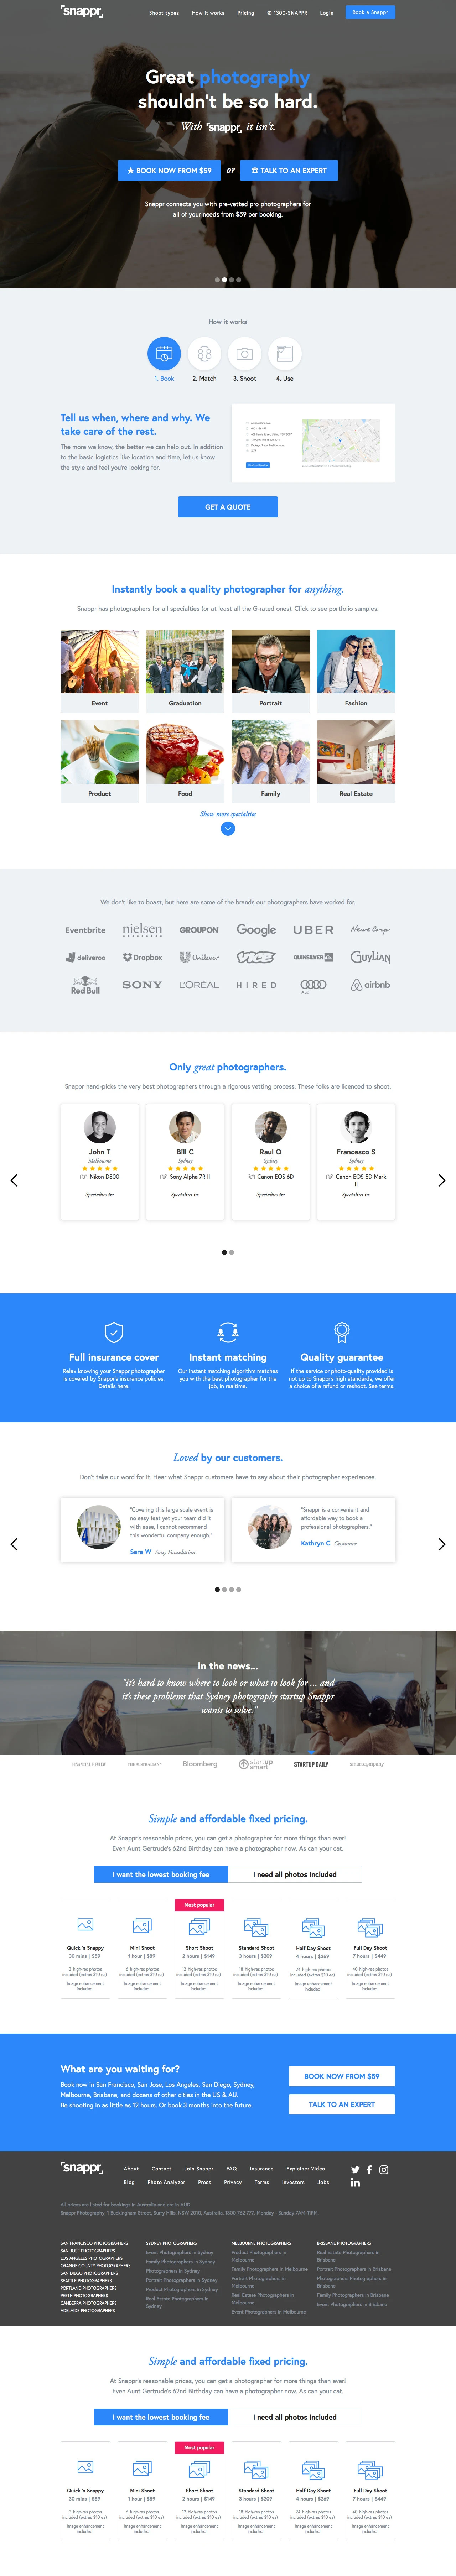 Snappr Photography Landing Page Example: Great photography shouldn't be so hard. Book a Pro Photographer Easily & Affordably